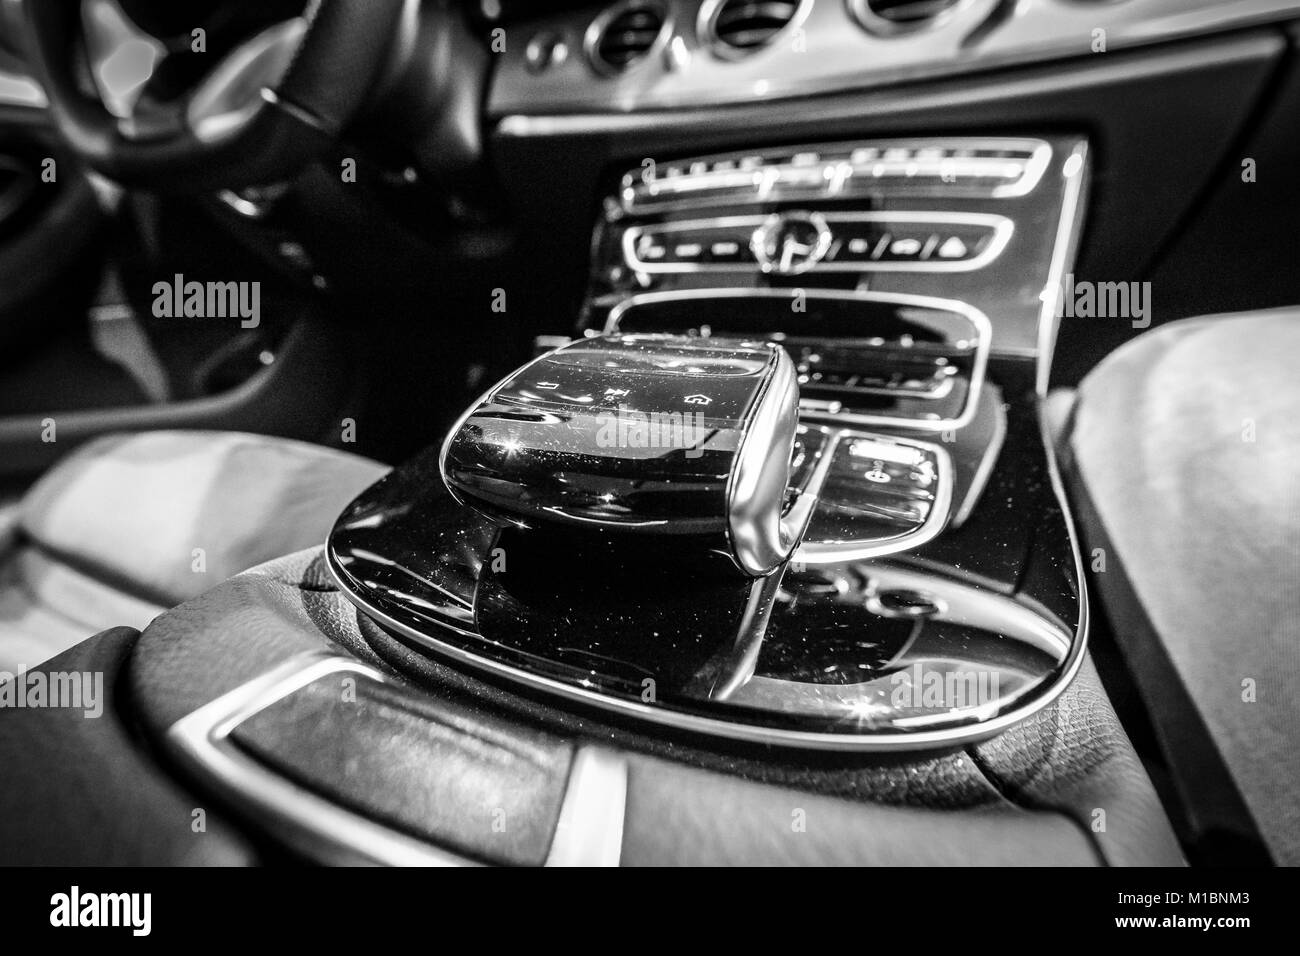 BERLIN - DECEMBER 21, 2017: Showroom. The shift knob of the executive car Mercedes-Benz E-Class E220d (W213). Close-up. Black and white. Since 2017. Stock Photo